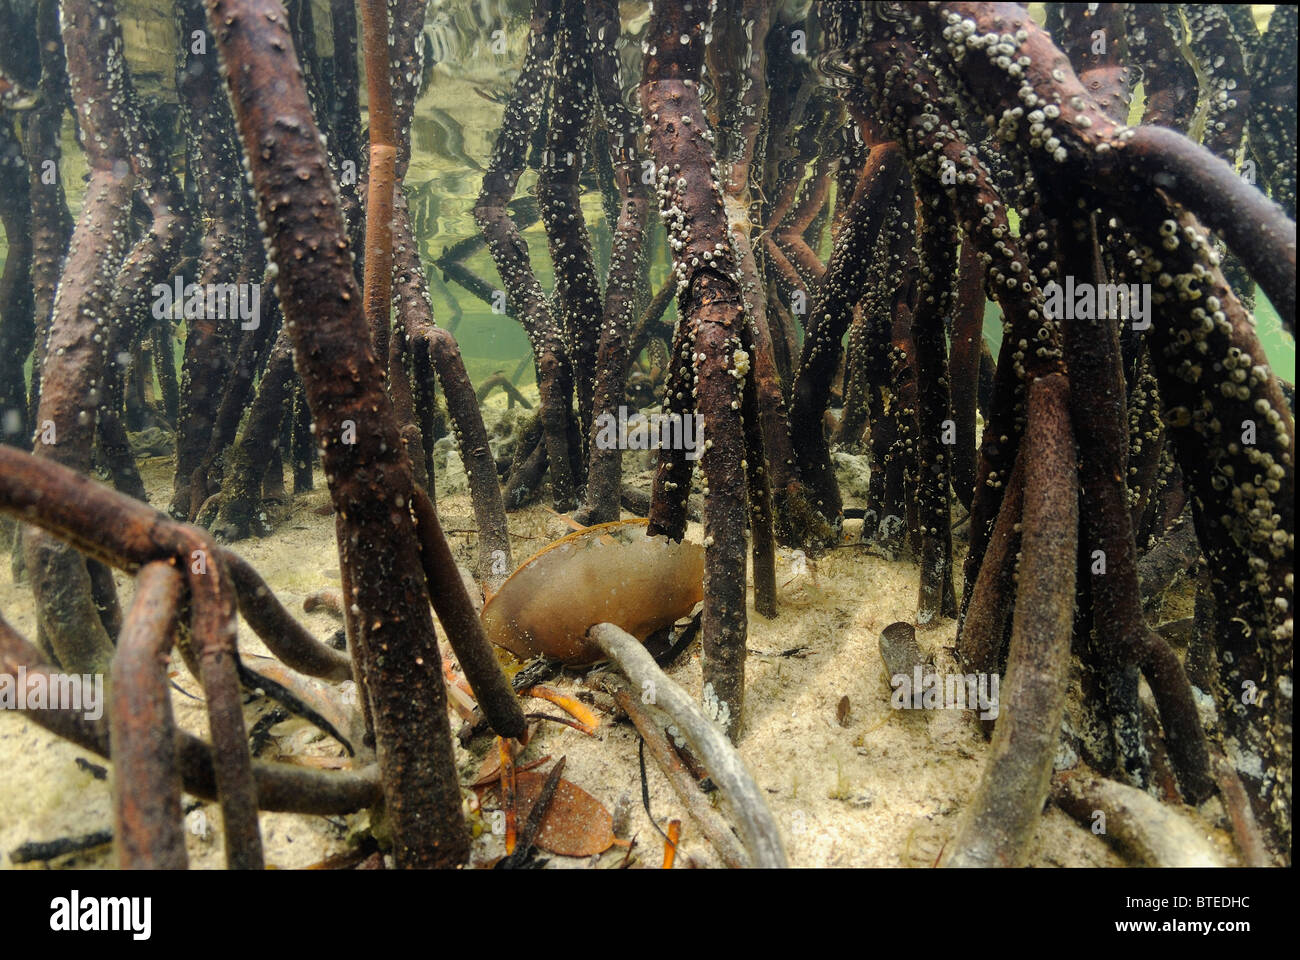 Red mangrove trees in Key Largo, Gulf of Mexico, Florida, USA Stock Photo